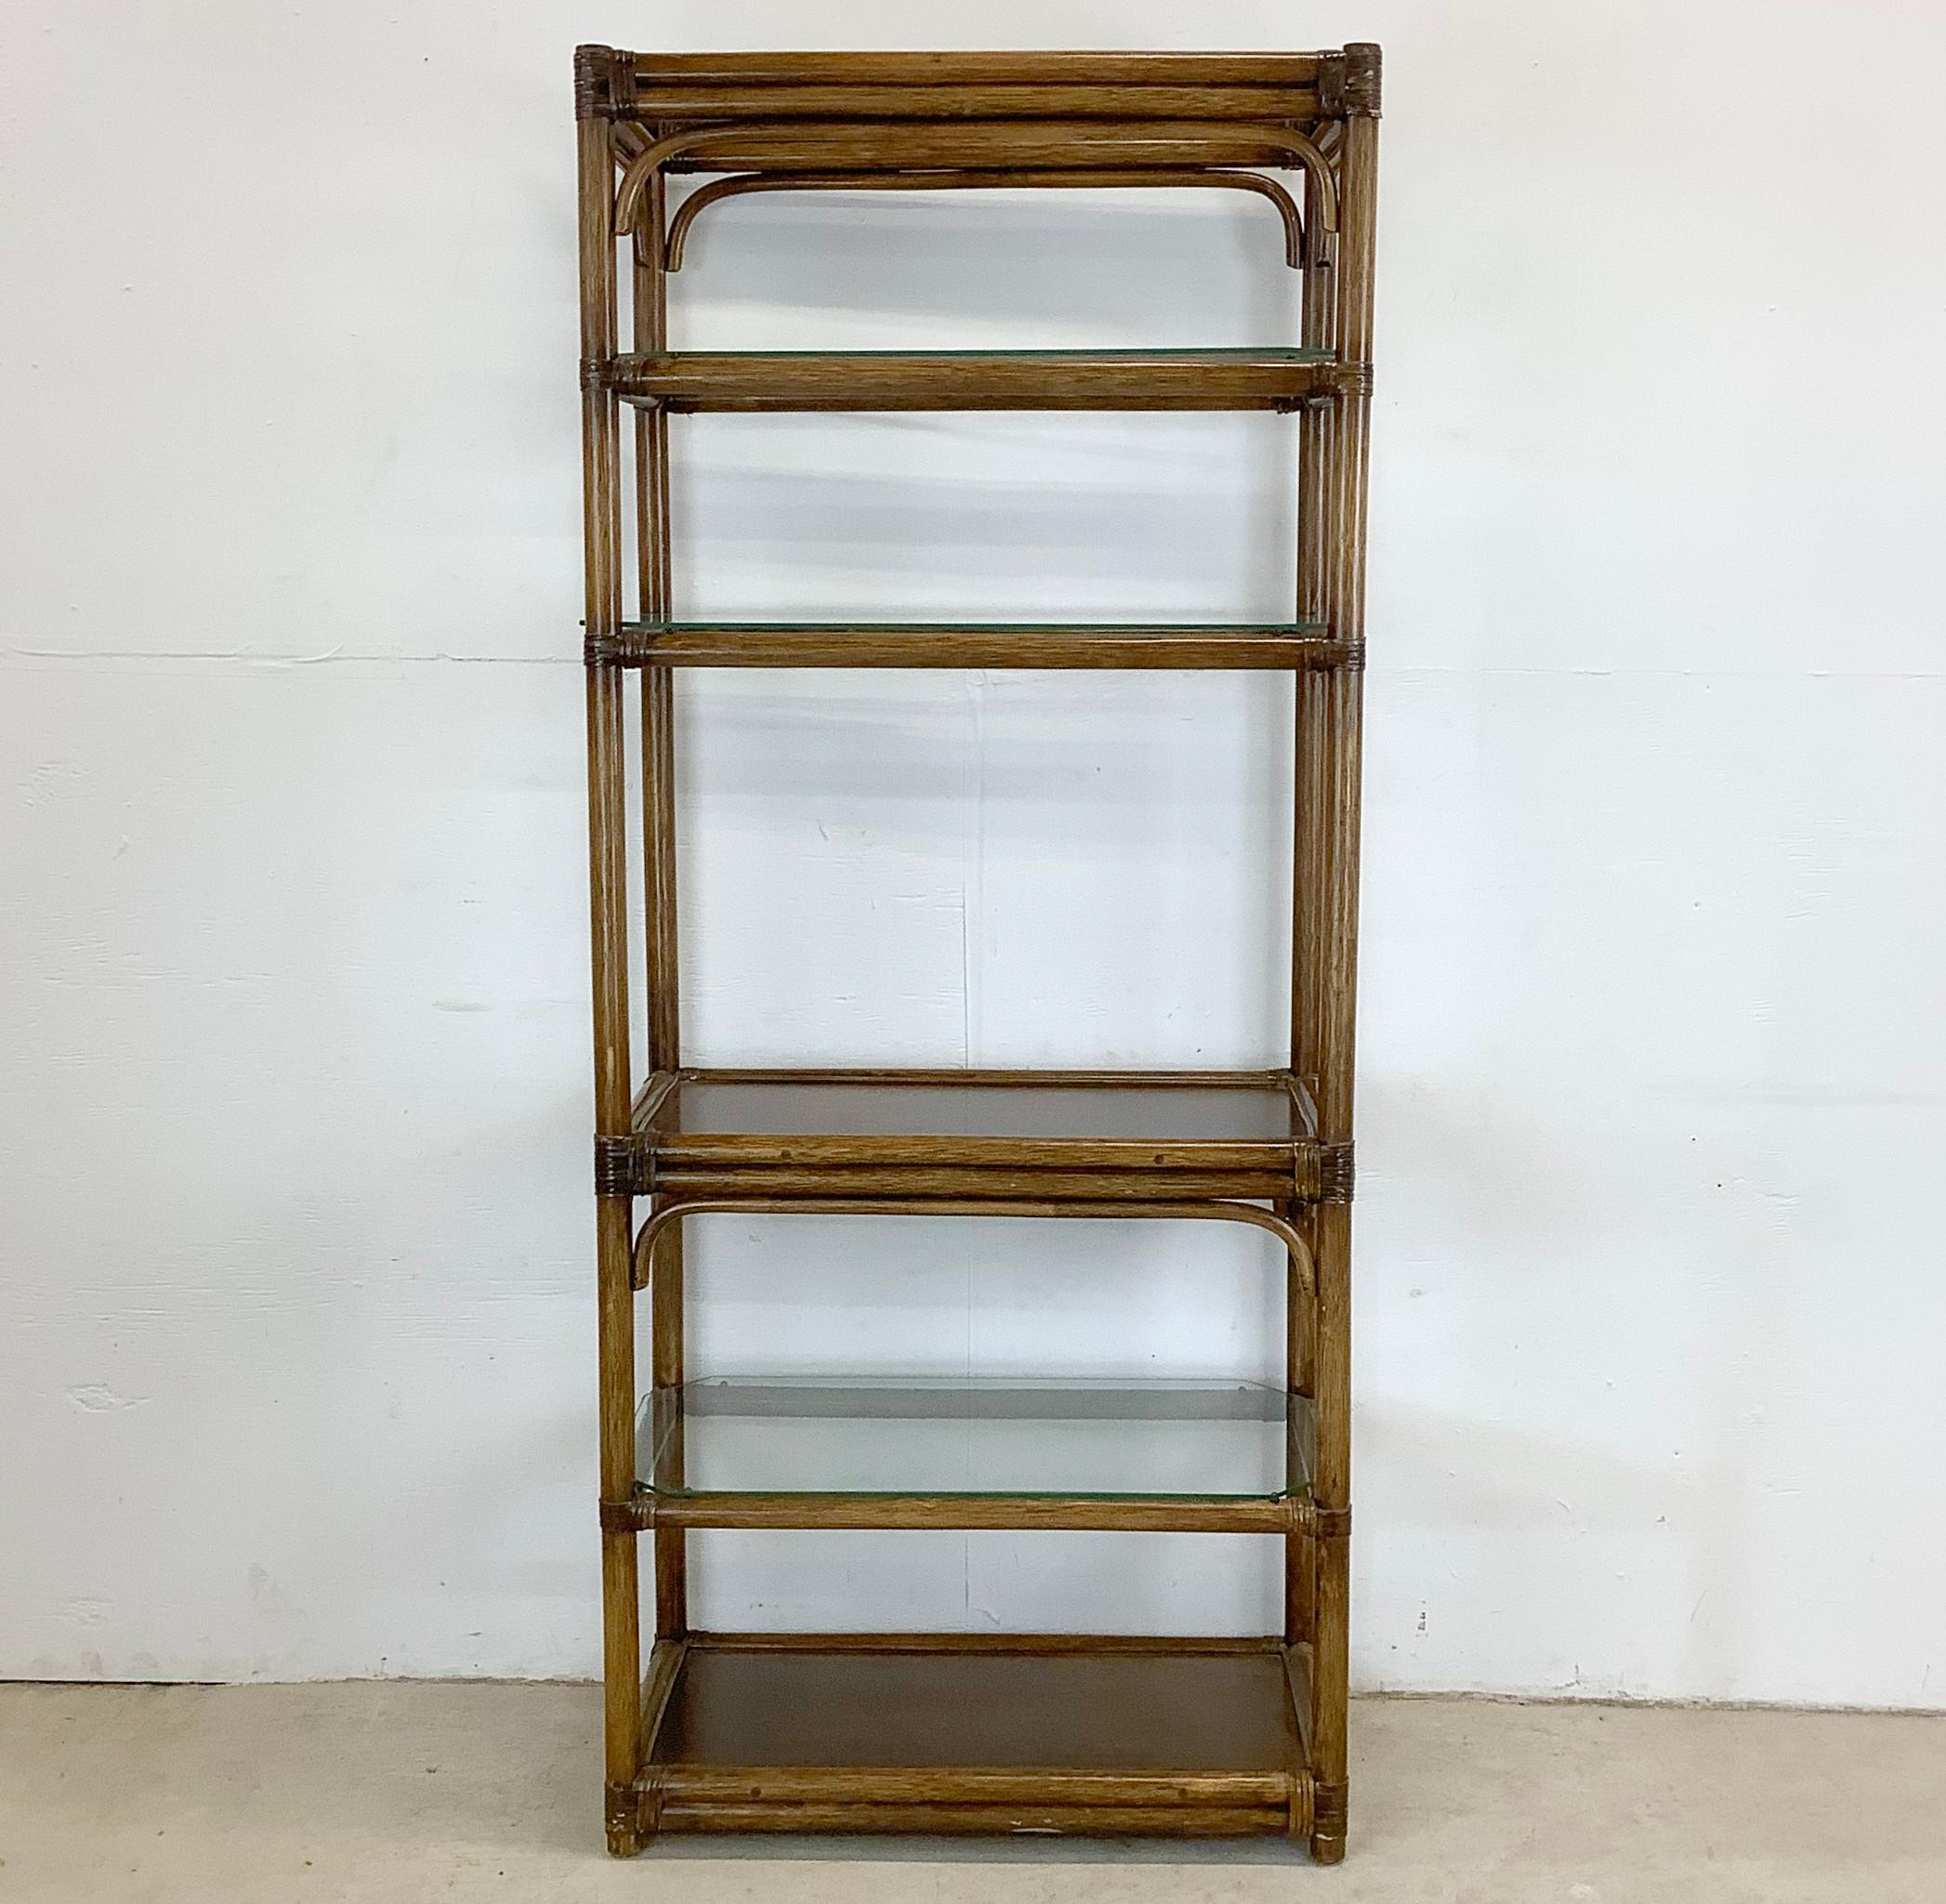 Invite a breath of coastal tranquility into your home with this enchanting faux bamboo shelving unit.  The vintage design of this piece artfully combines the casual elegance of beachfront living with the free-spiritedness of boho chic decor. Its